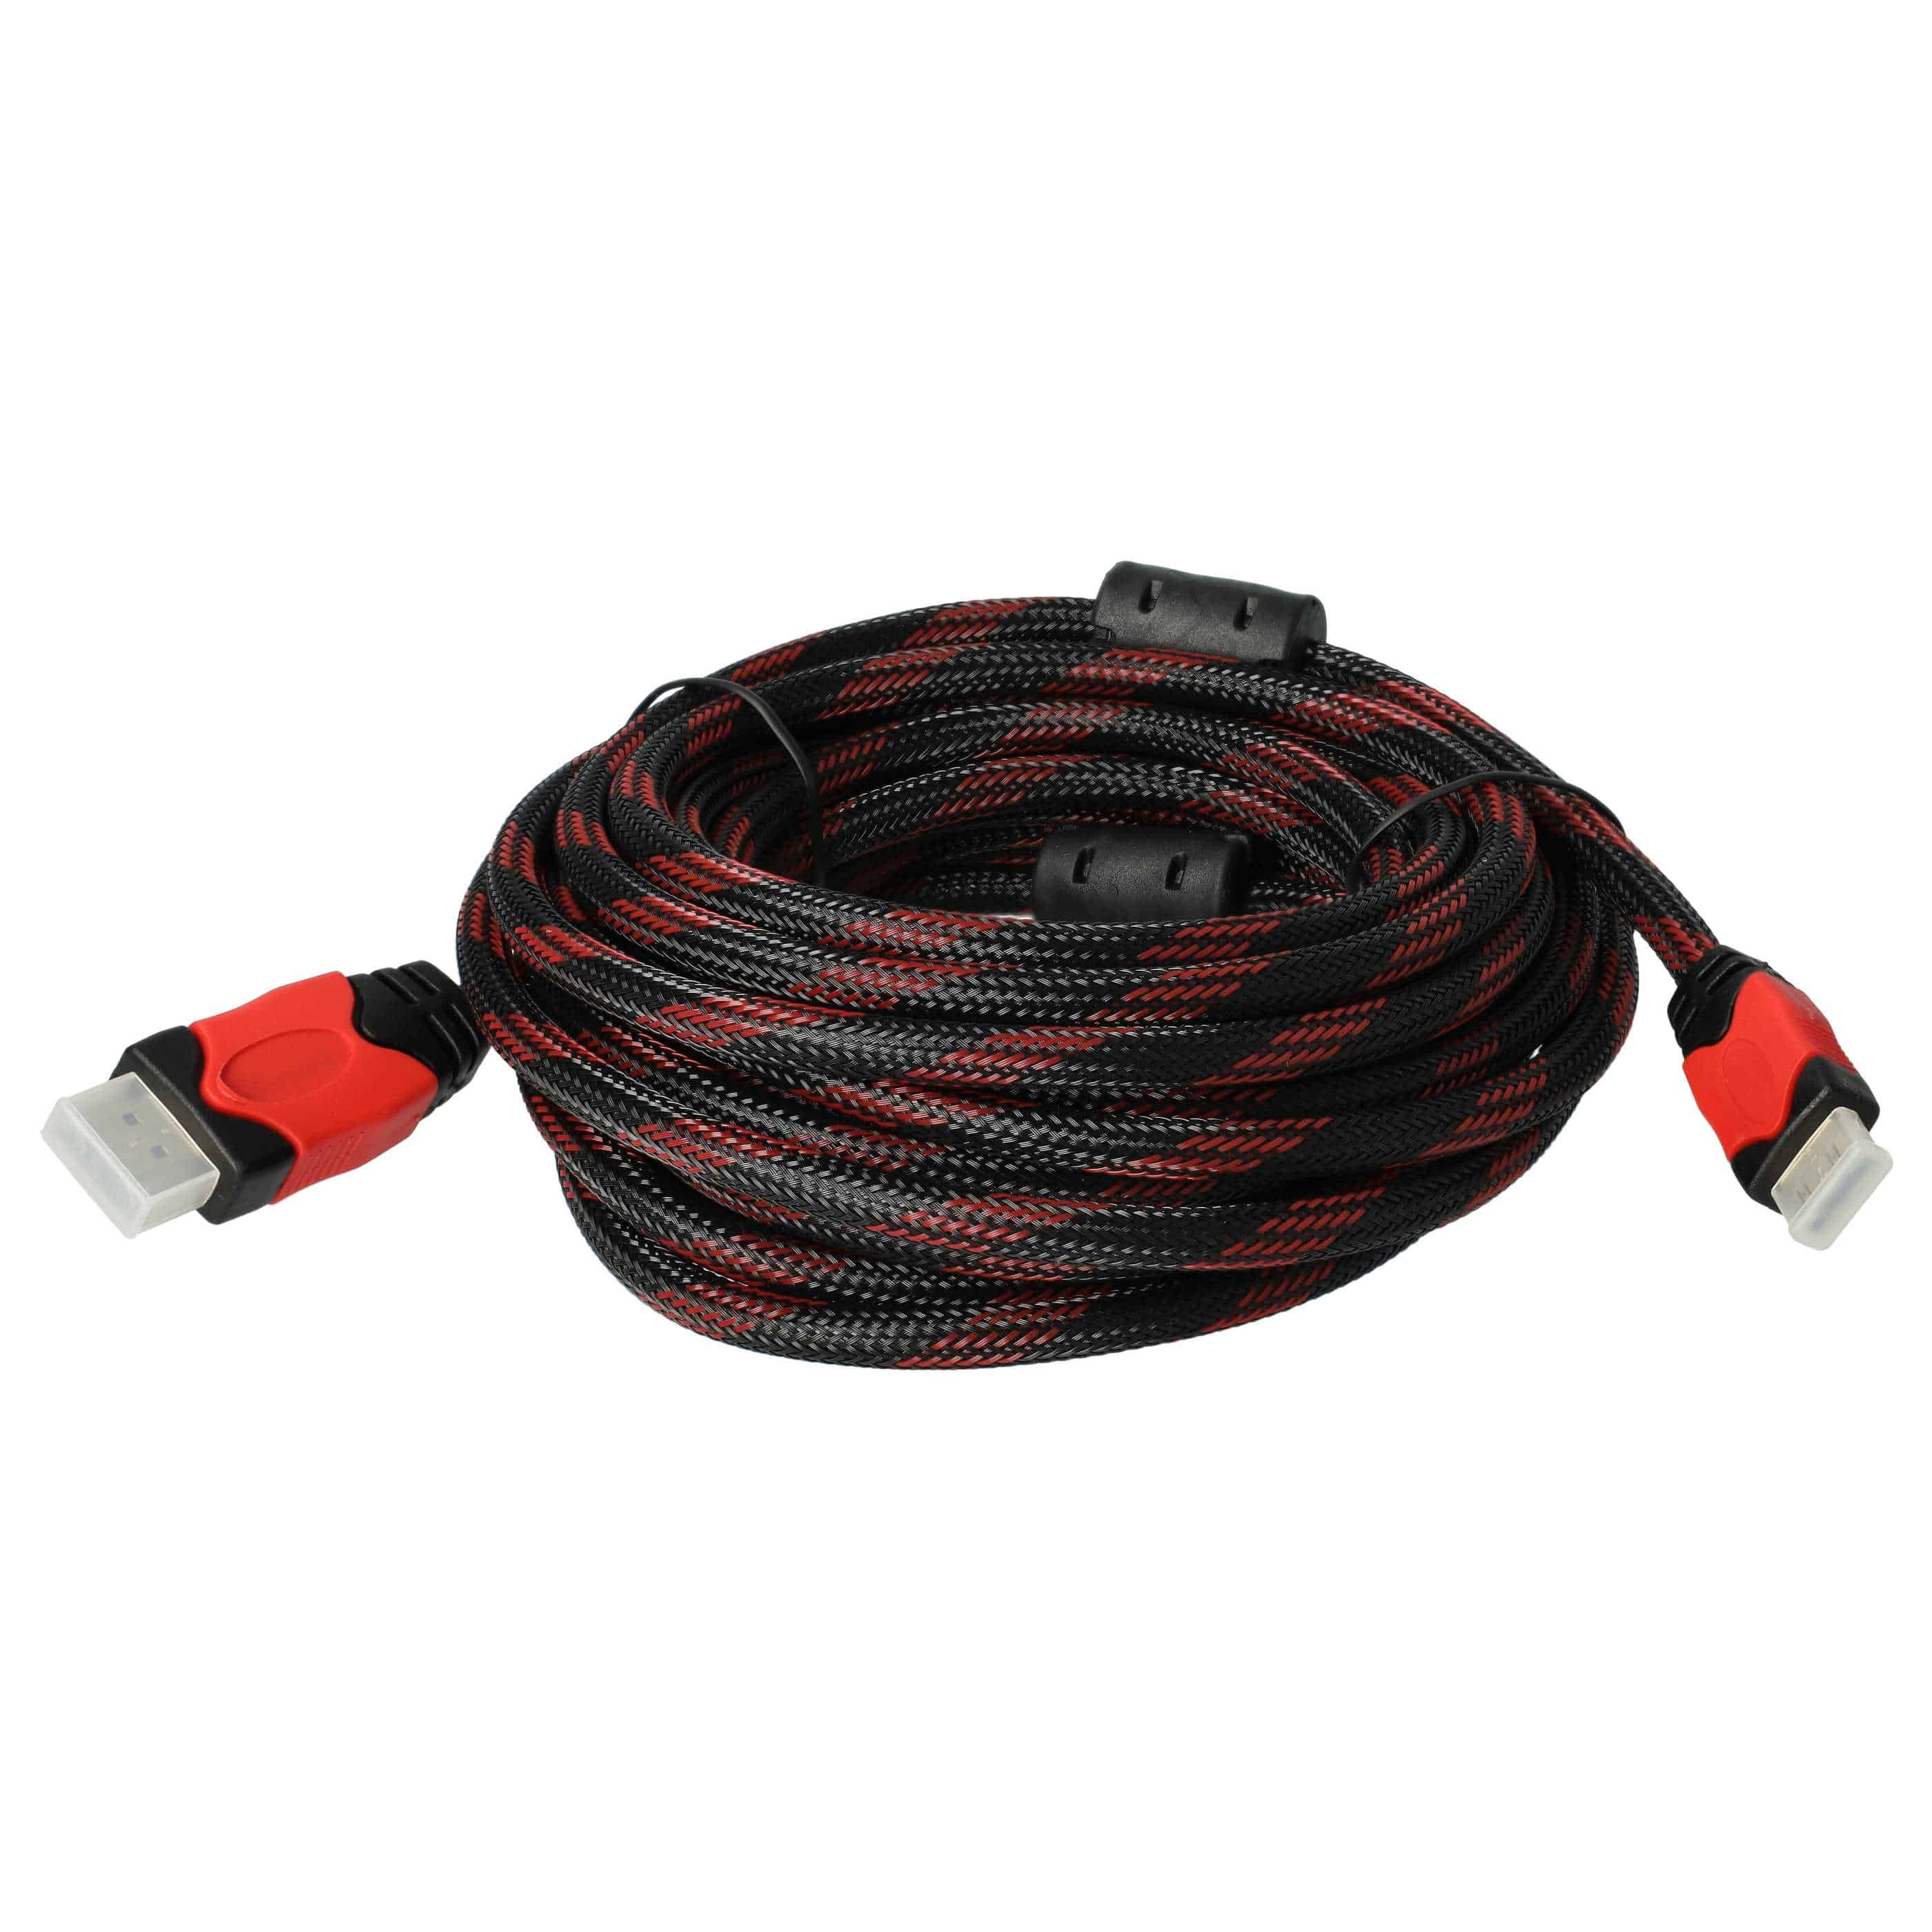 HDMI Cable braided 5mfor Tablet, TV, Television, Playstation, Computer, Monitor, DVD Player etc.